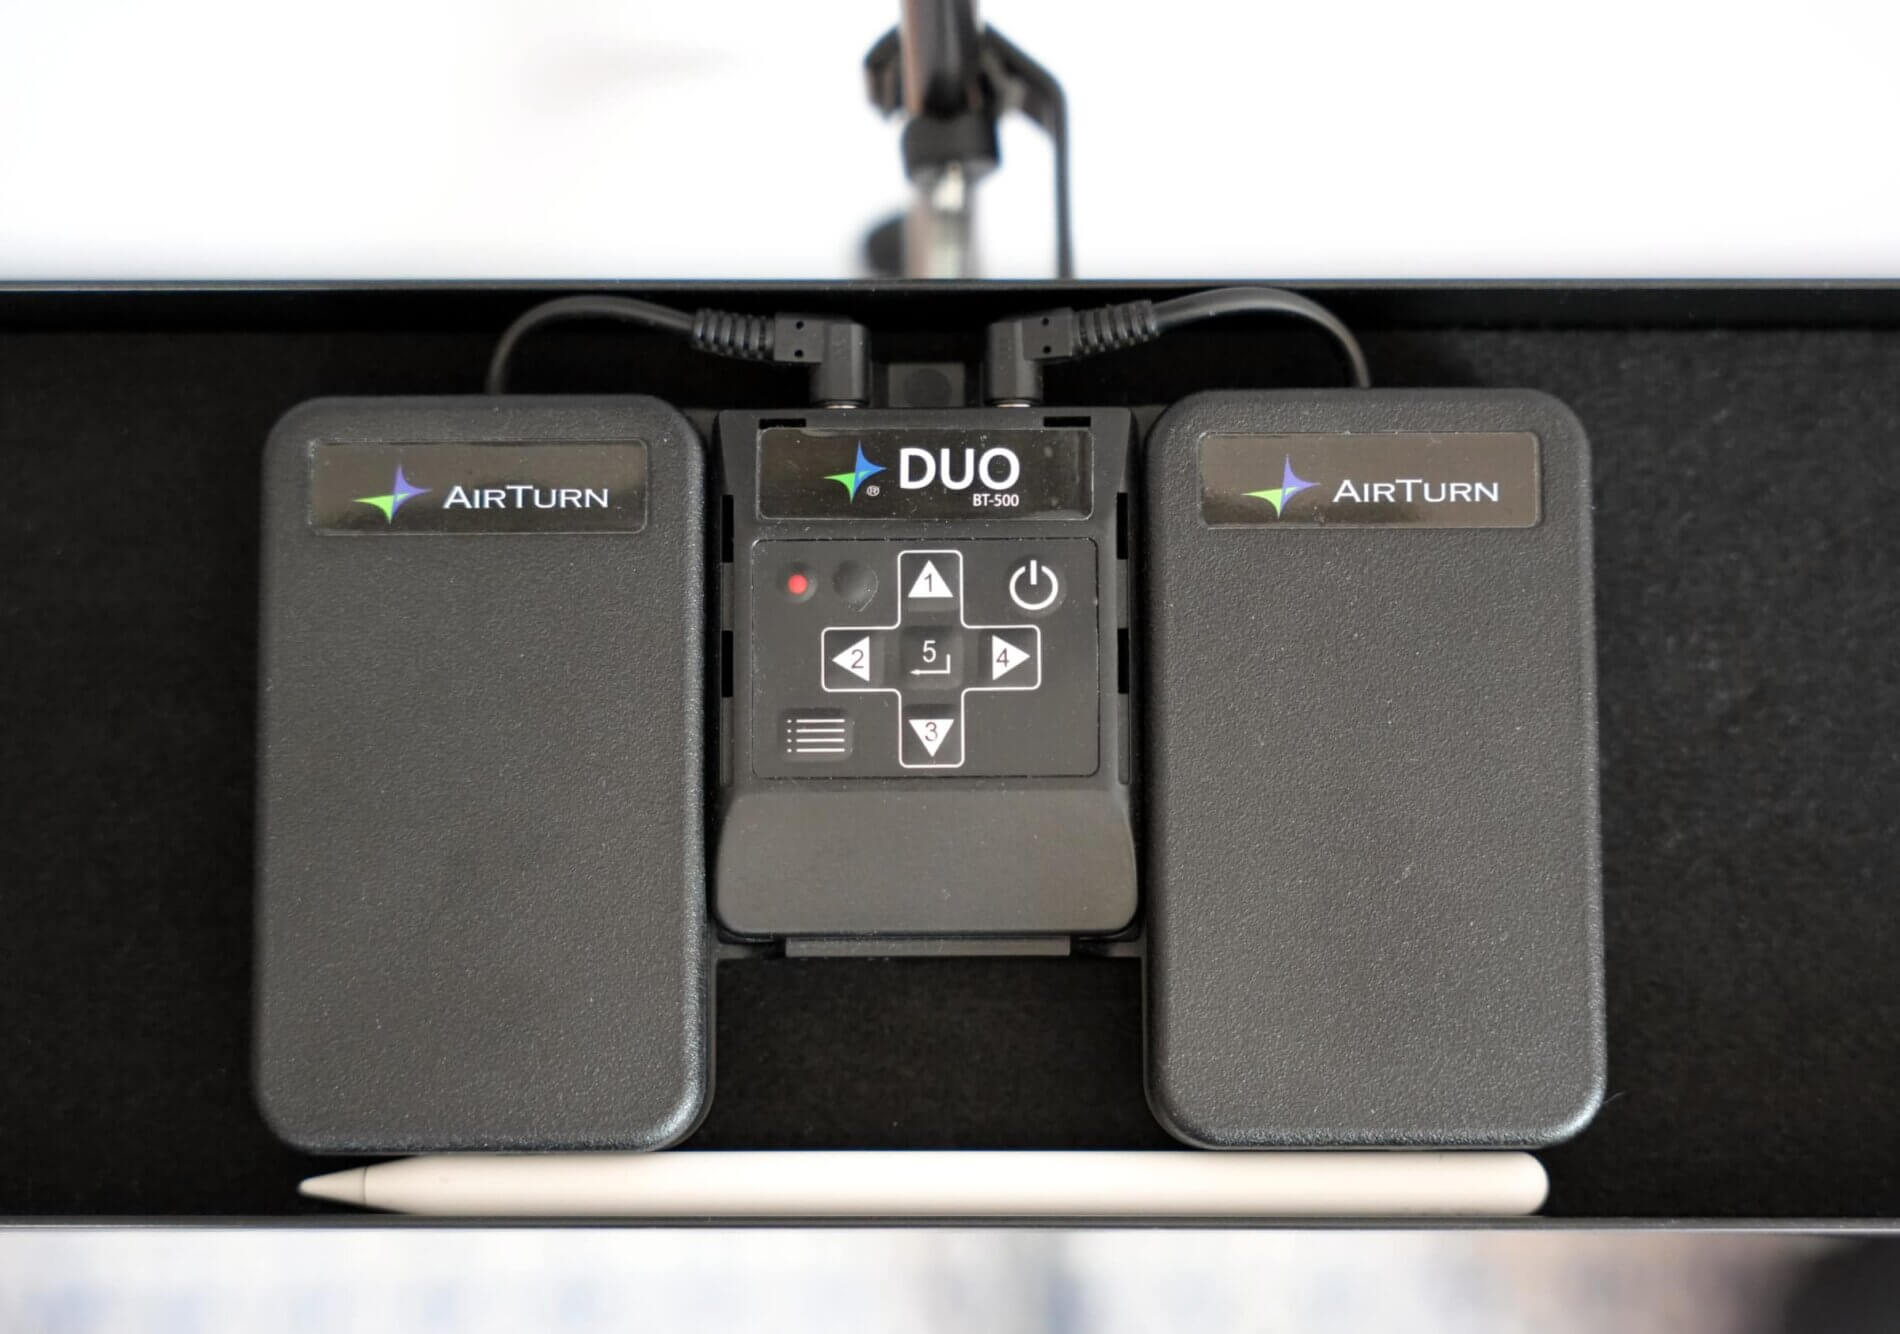 Page turner - The AirTurn Duo on an accessory tray for music stands